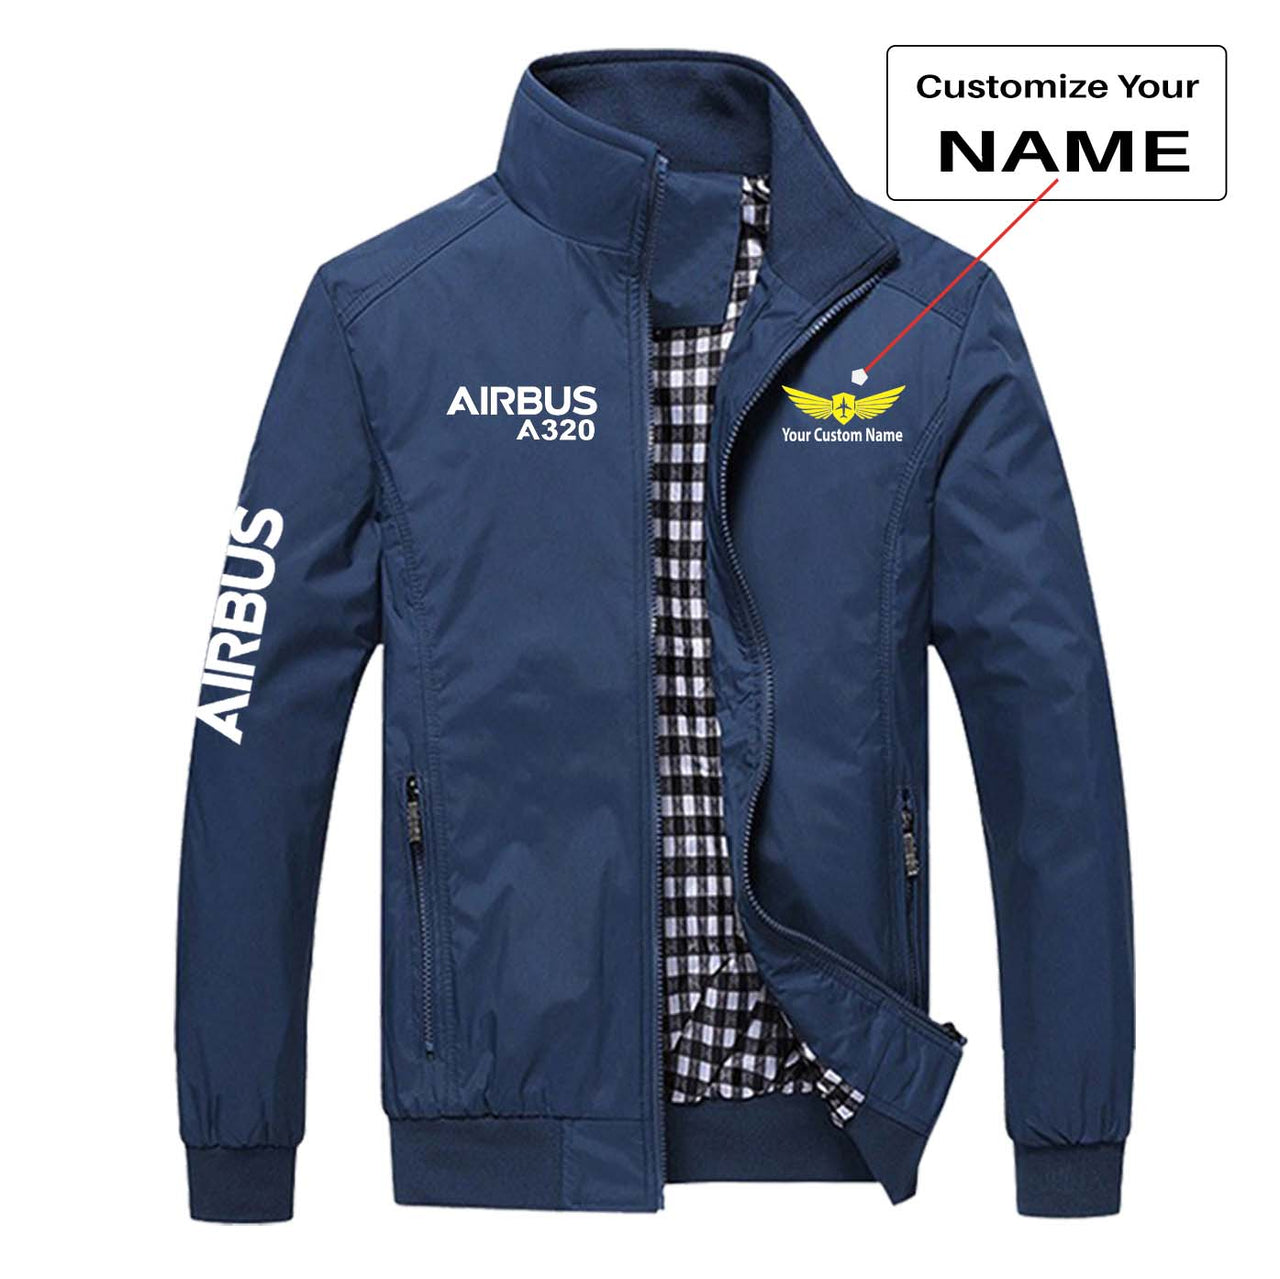 Airbus A320 & Text Designed Stylish Jackets